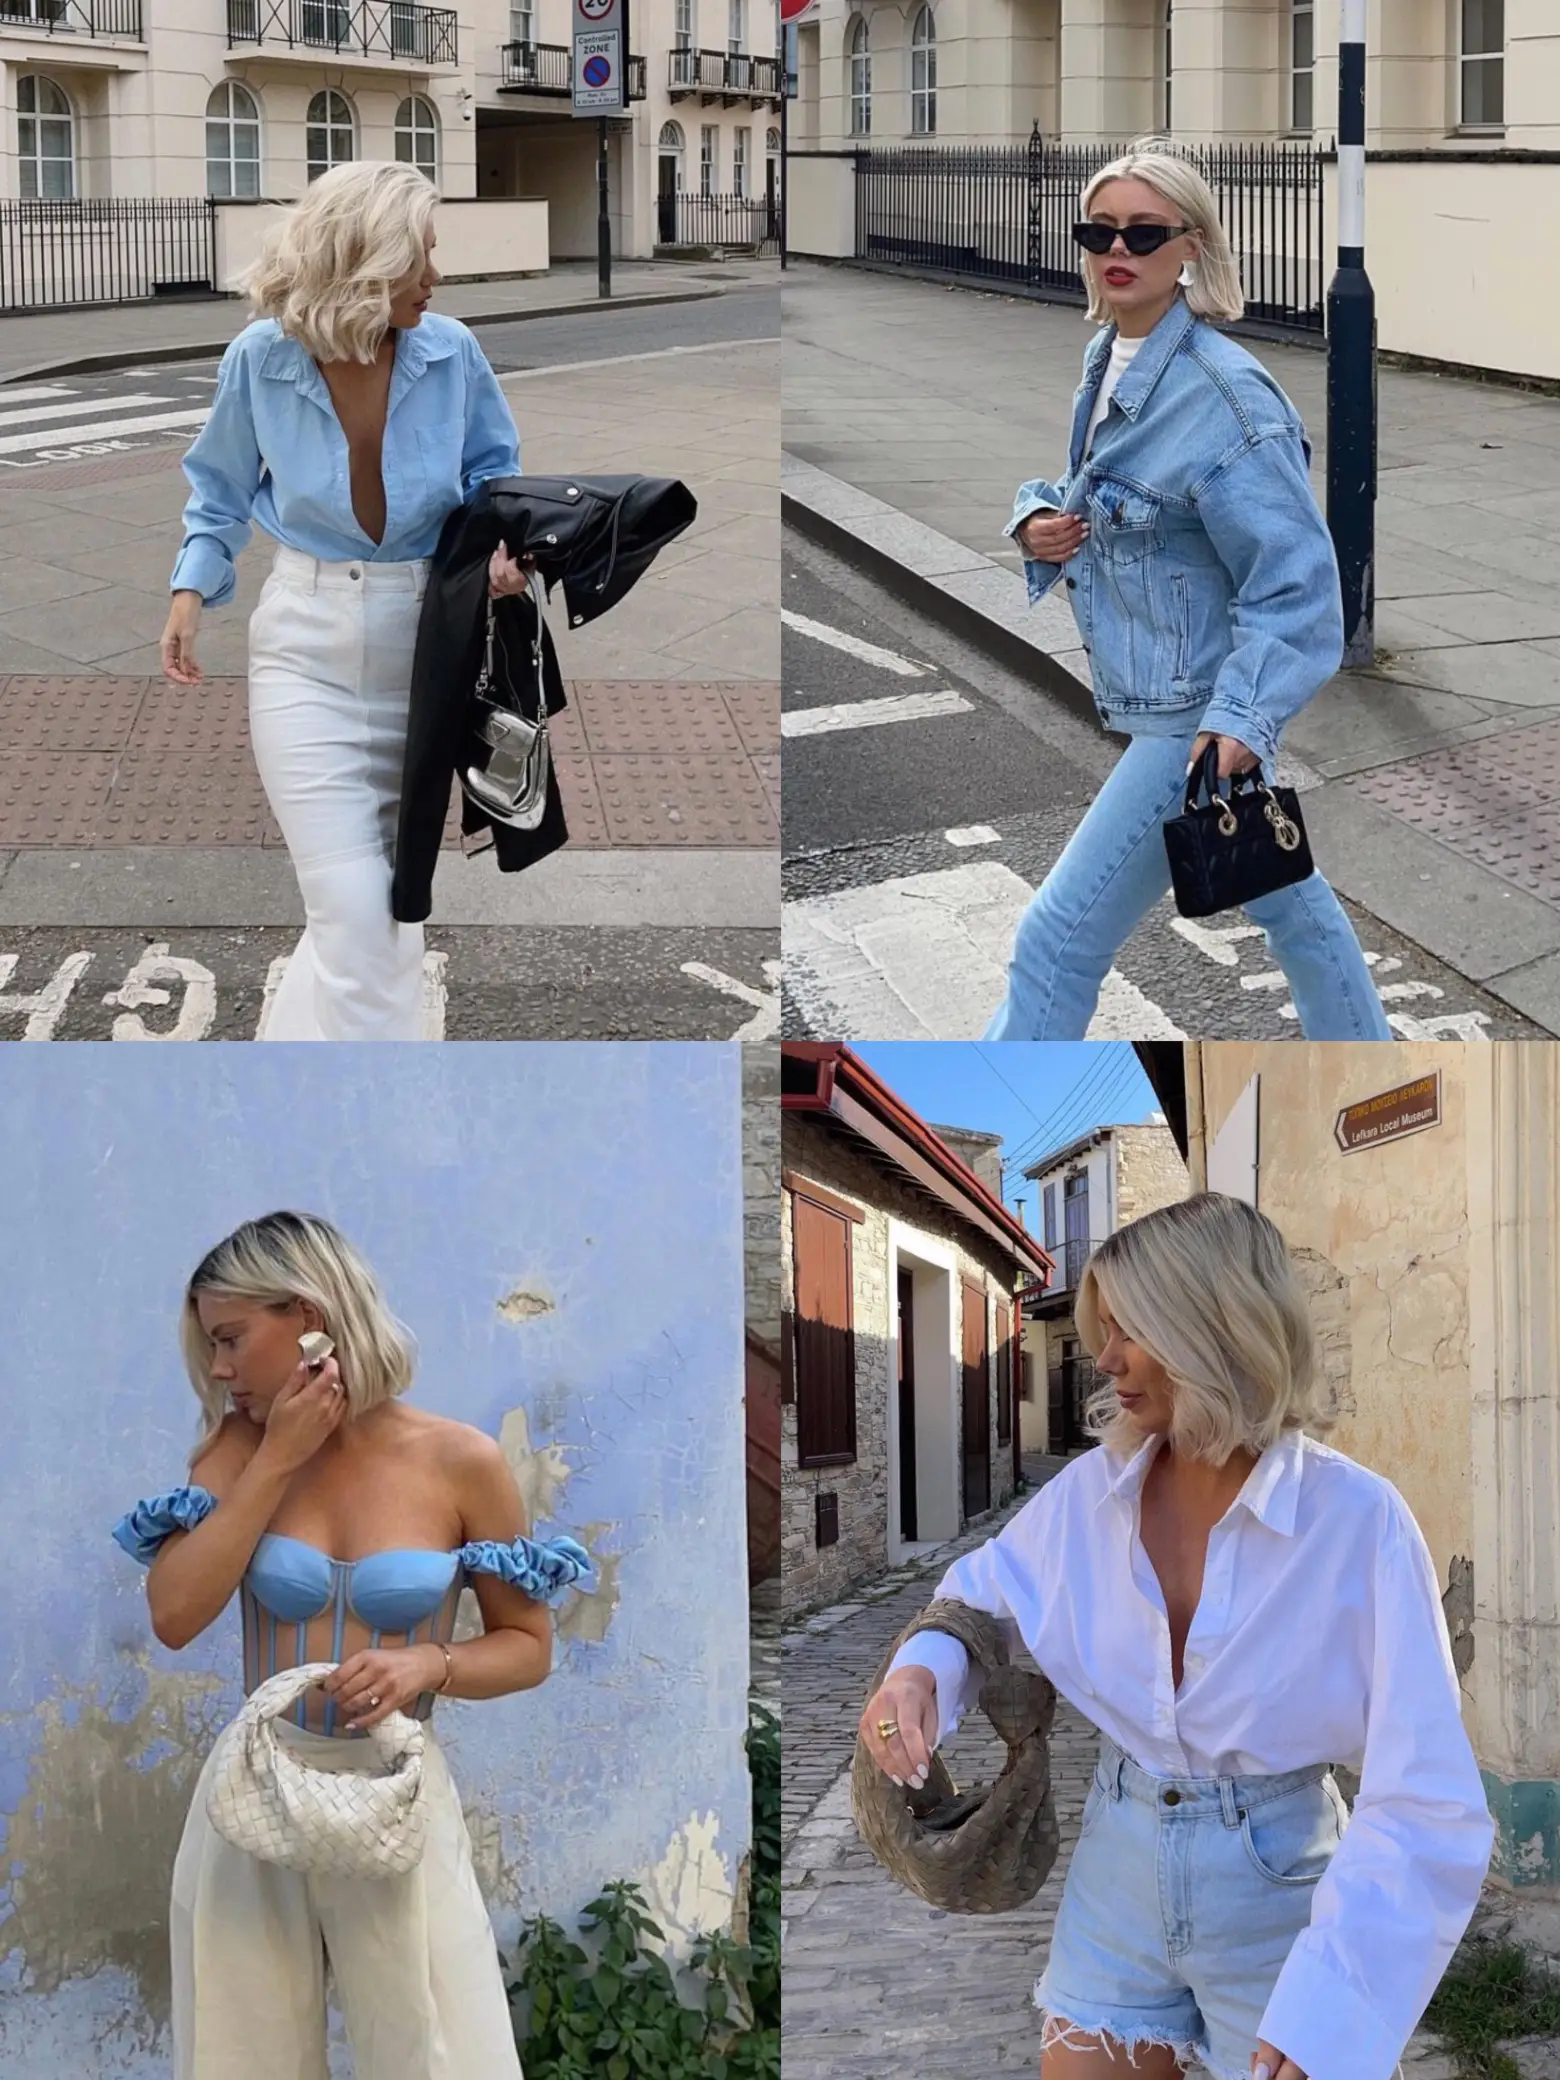  A woman in a blue shirt is standing on a street with a purse on her shoulder.